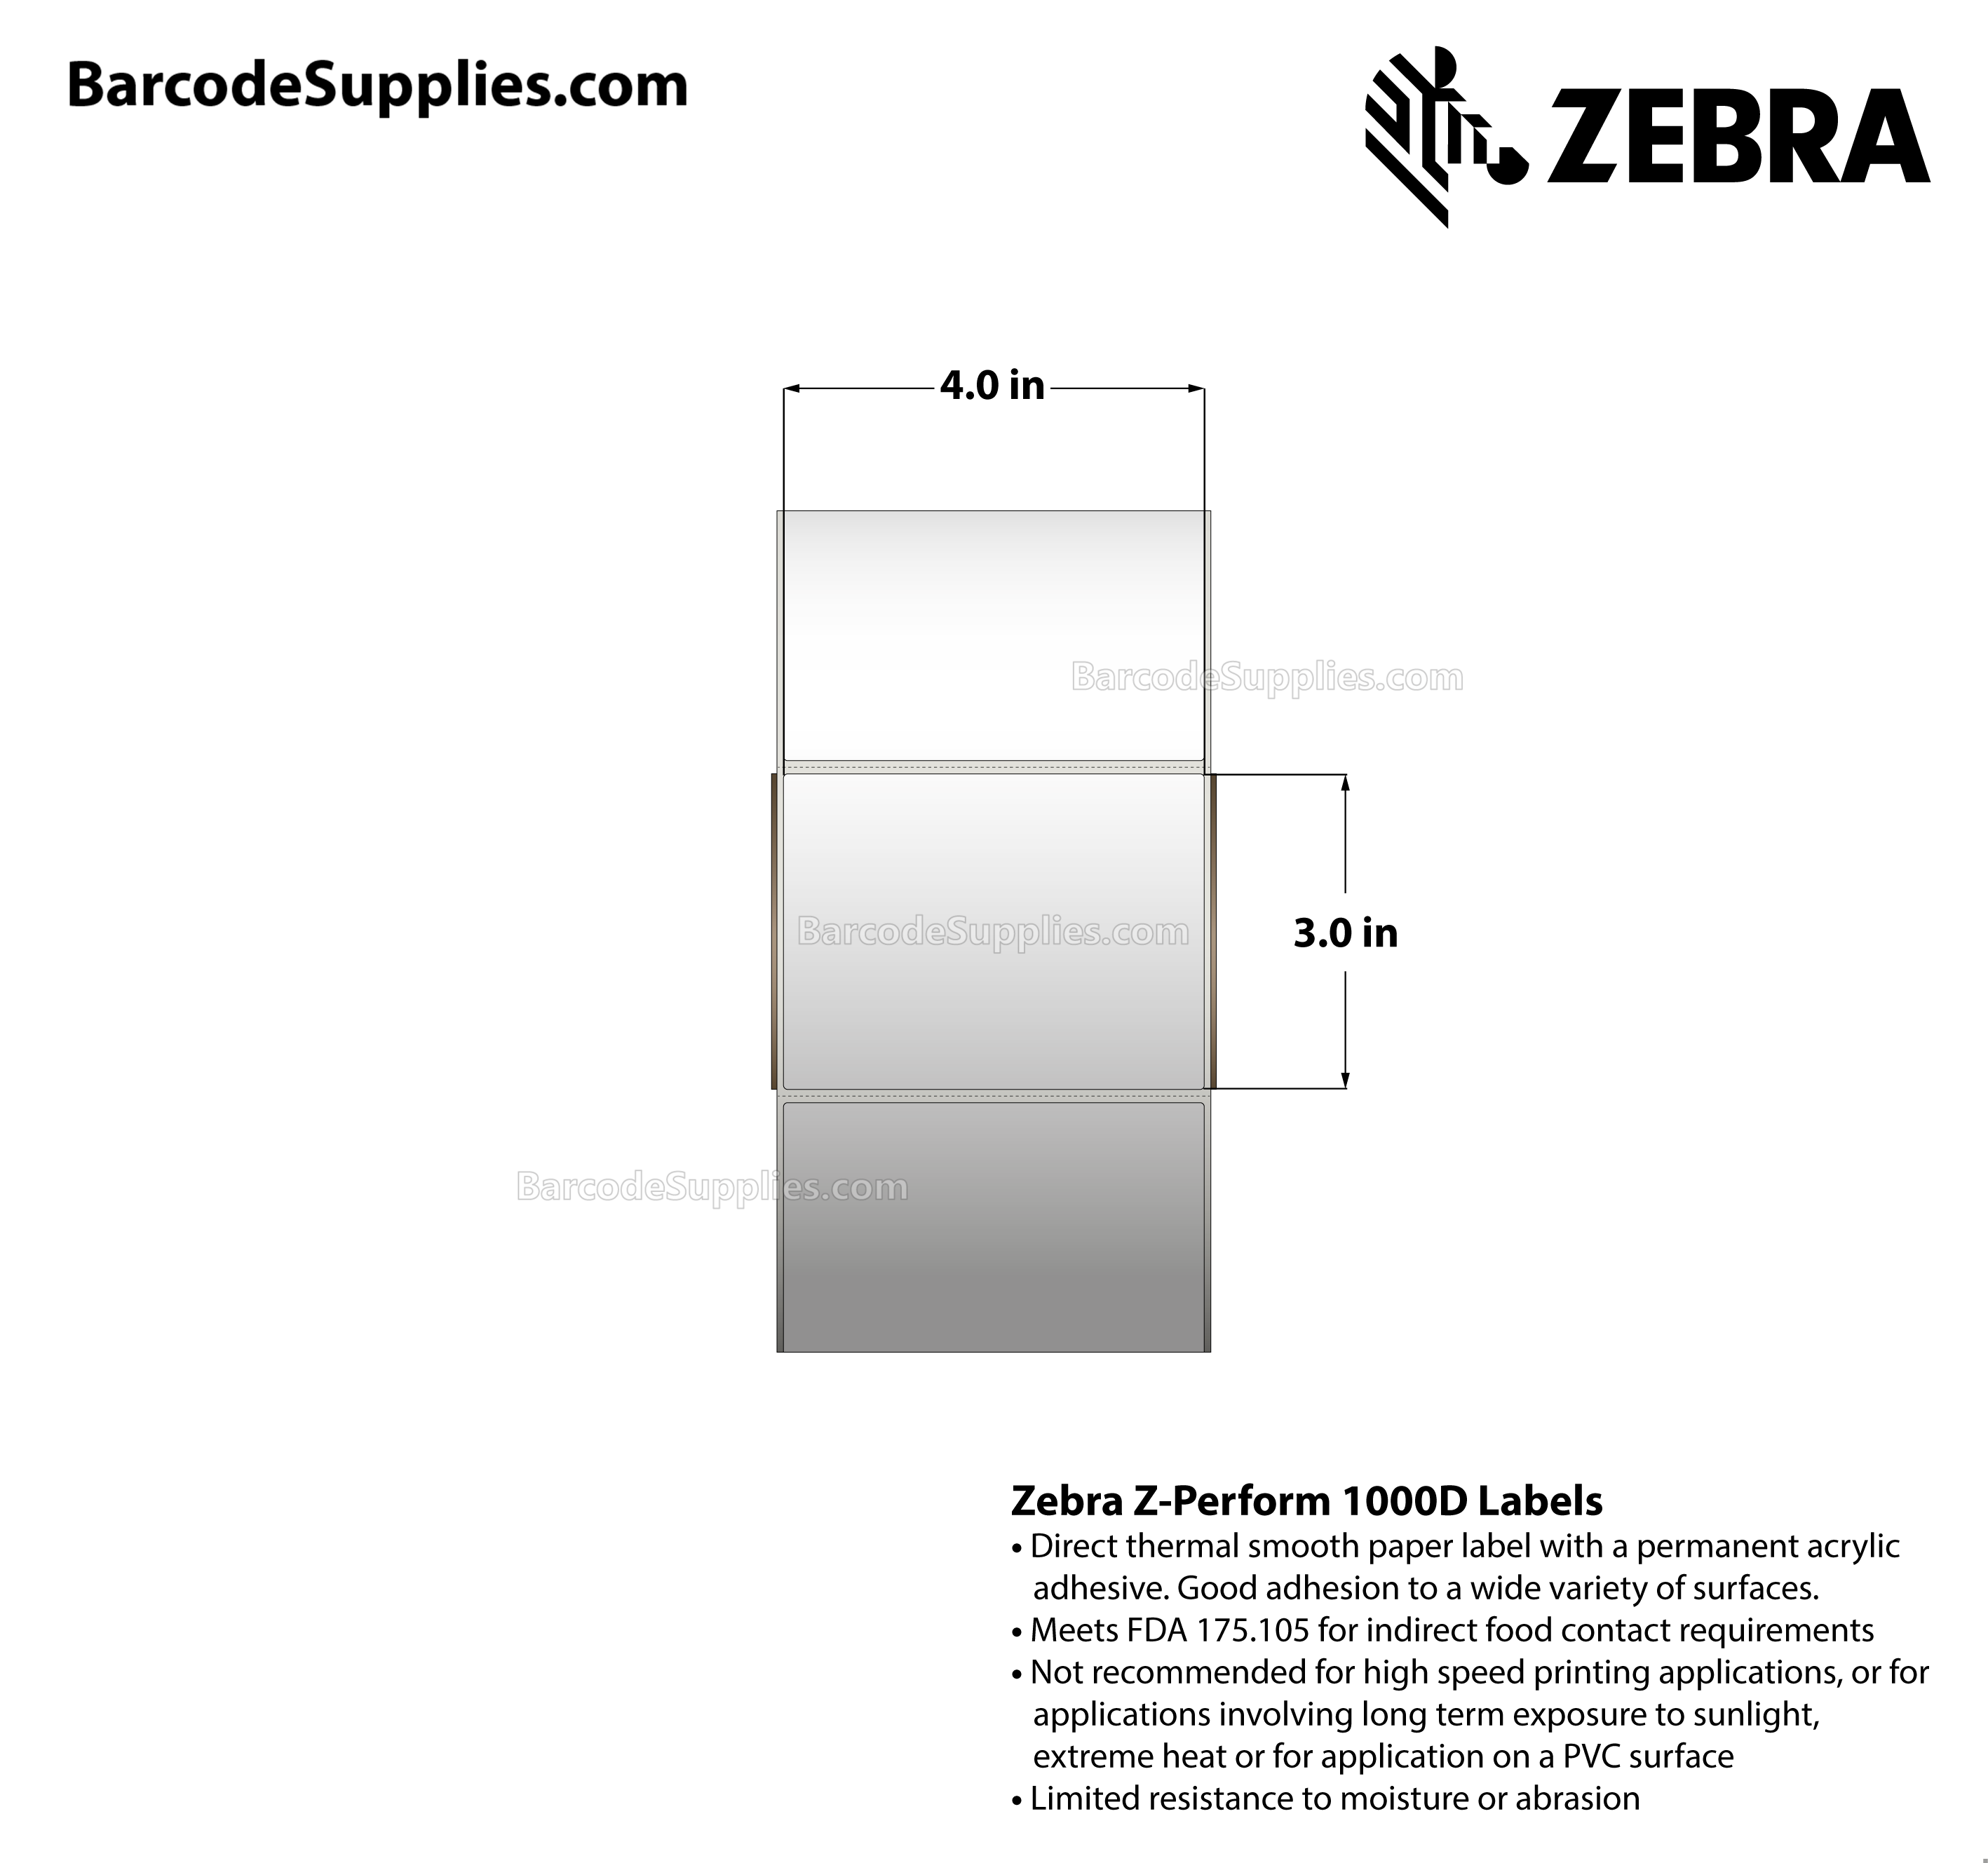 Products 4 x 3 Direct Thermal White Z-Perform 1000D Labels With Permanent Adhesive - Perforated - 2000 Labels Per Roll - Carton Of 4 Rolls - 8000 Labels Total - MPN: 10000302